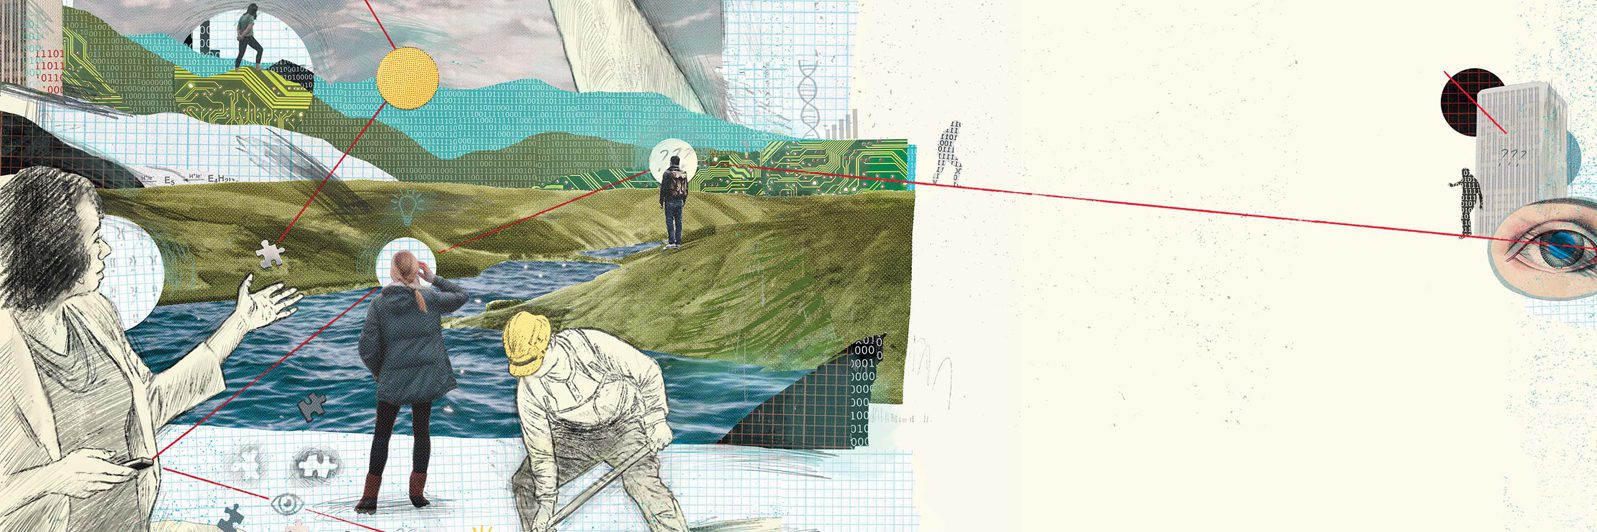 An illustrated graphic shows a man in a construction hat digging, a woman looking a stream, puzzle pieces, mountains and a woman teaching. It's meant to illustrate the idea of how big data is used in numerous ways.